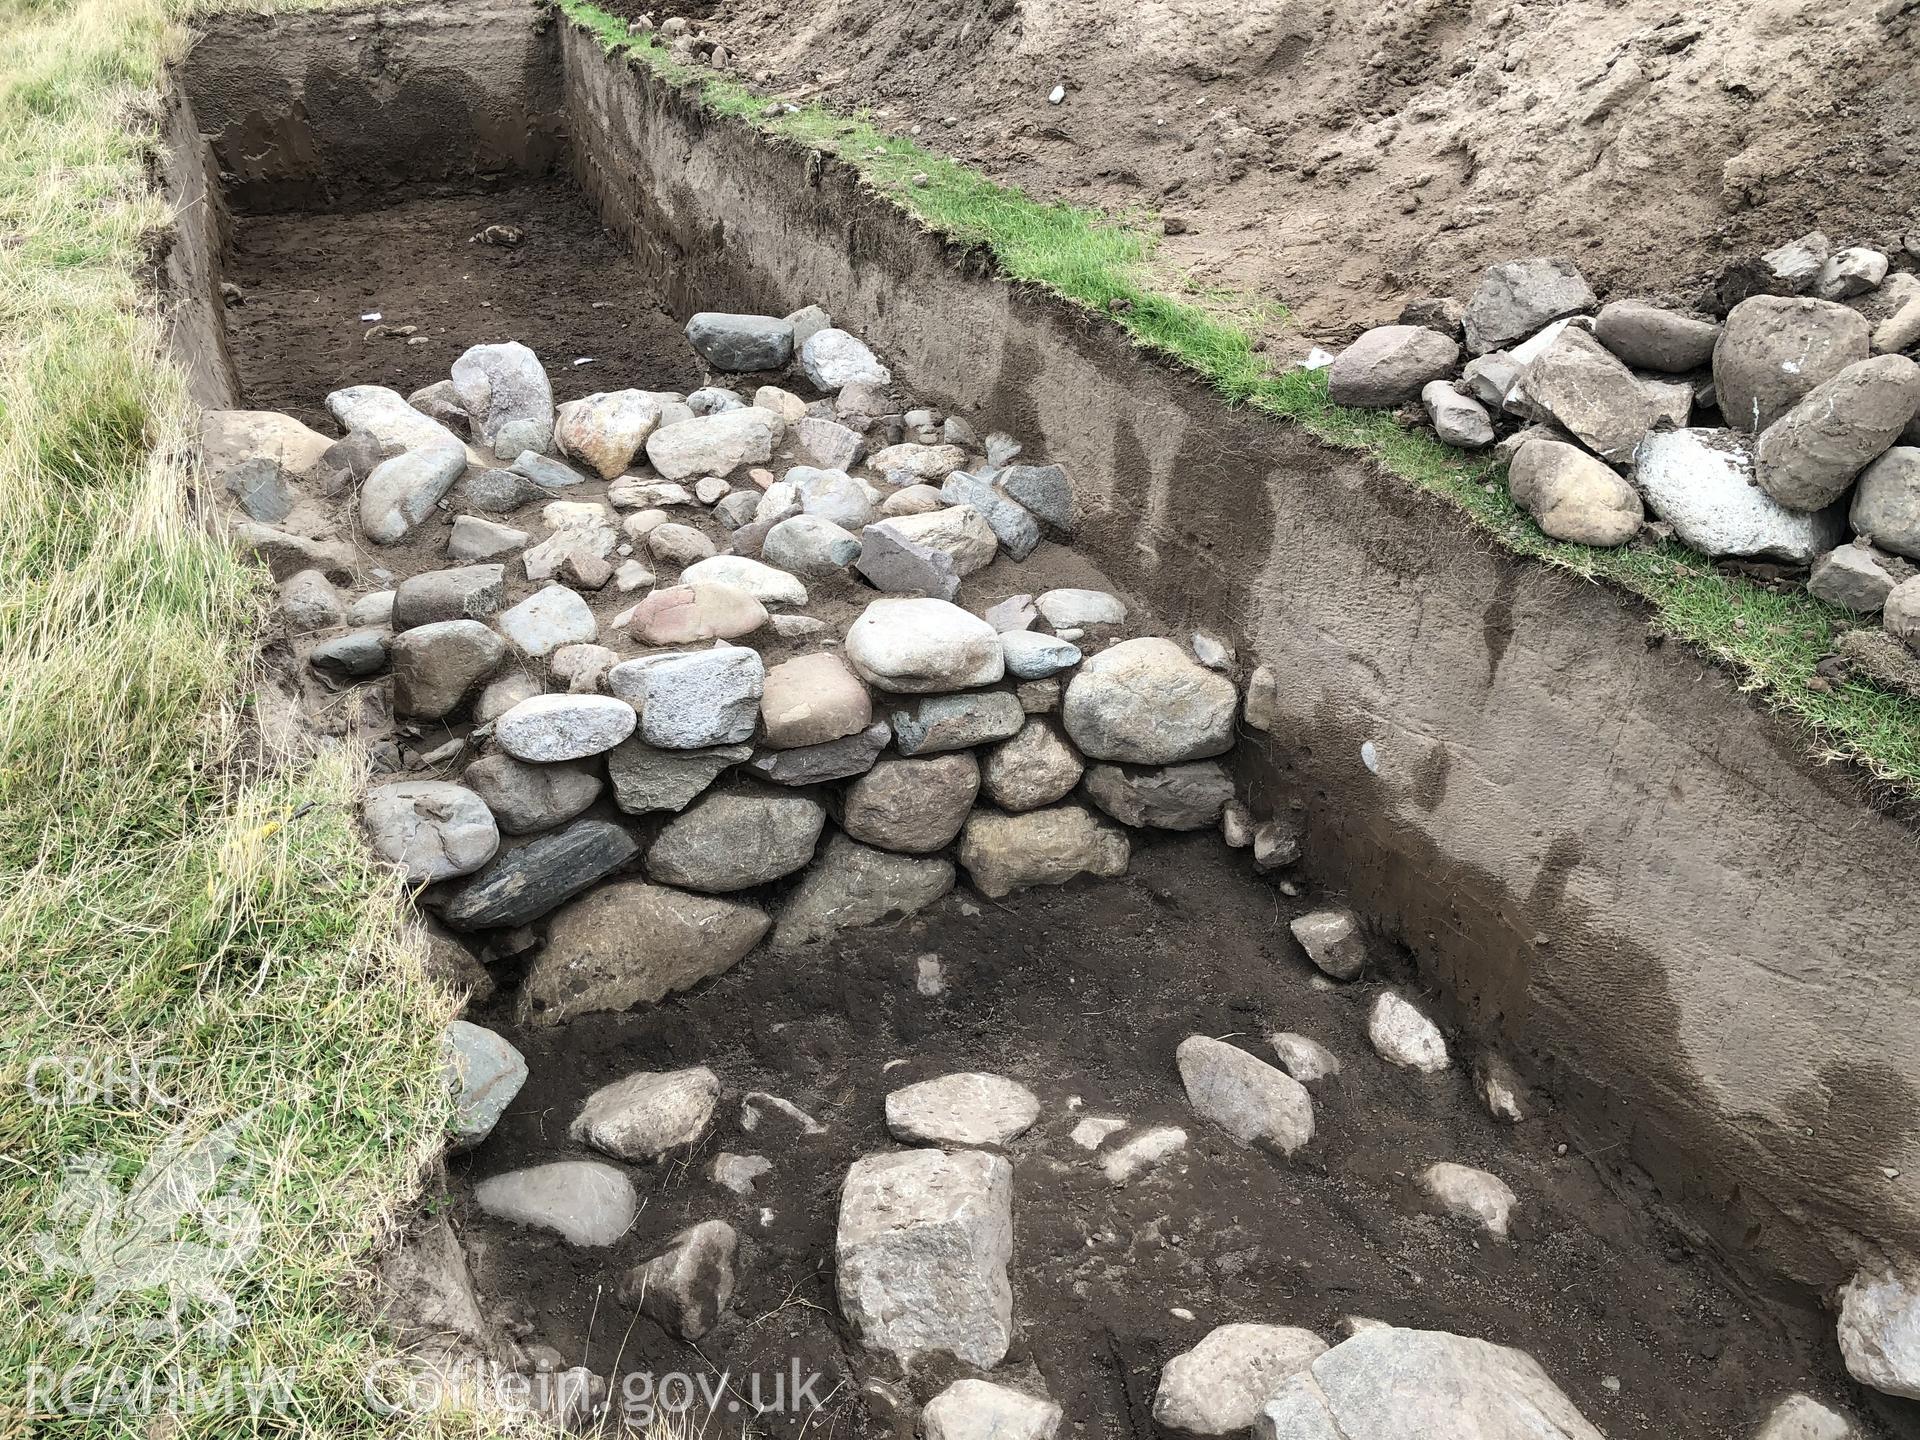 Roundhouse wall partially excavated in trench Taken by Toby Driver. Produced with EU funds through the Ireland Wales Co-operation Programme 2014-2023. All material made freely available through the Open Government Licence.